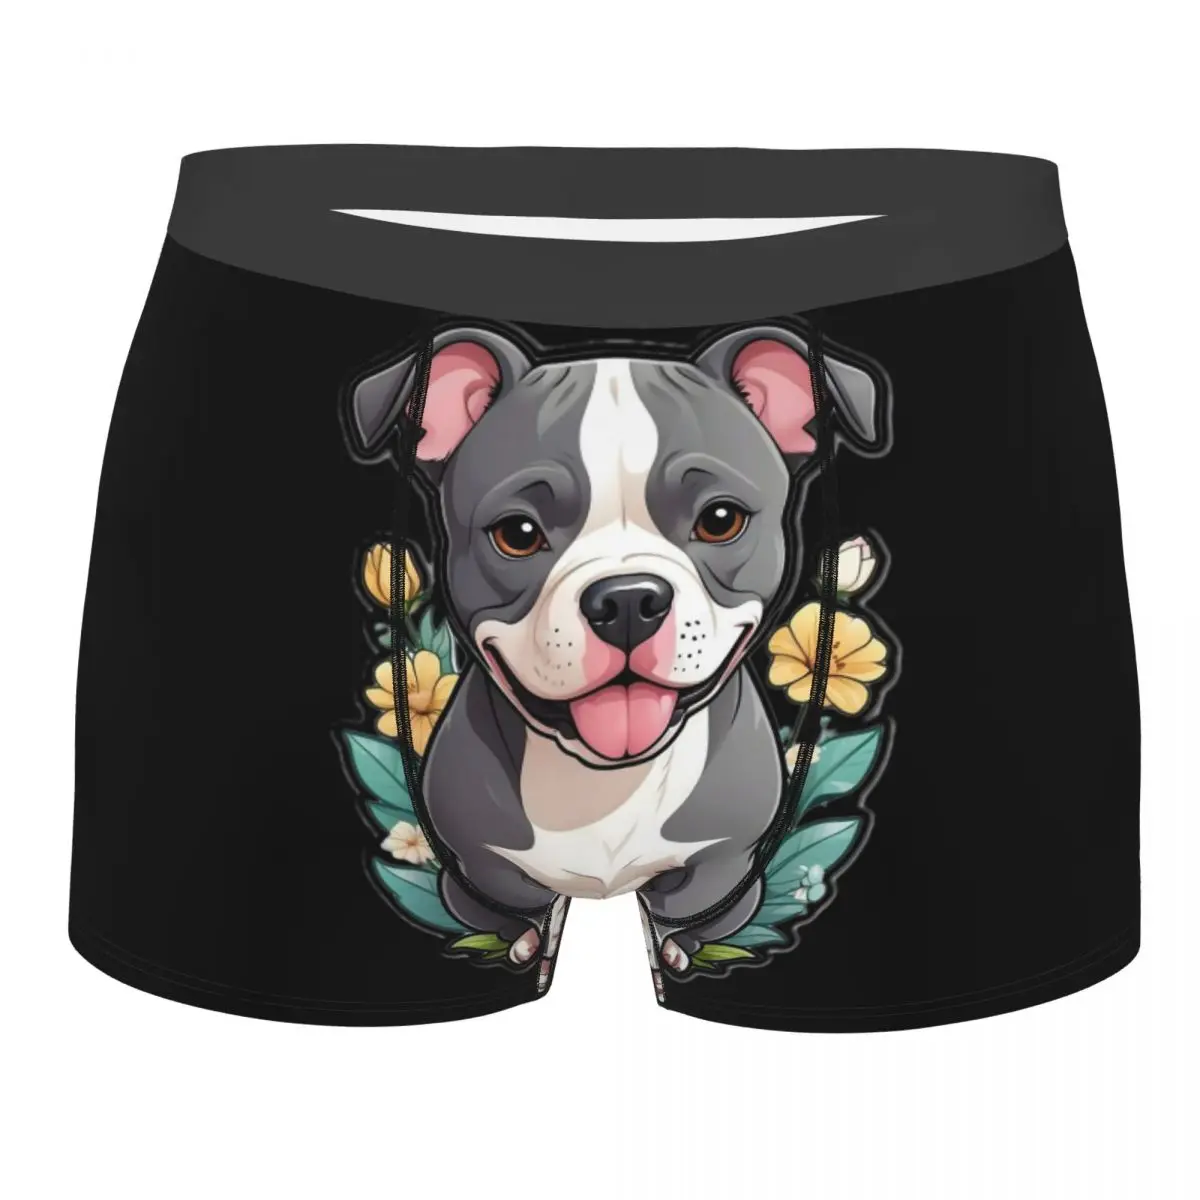 pattern Cute Pets Bulldog Mencosy Boxer Briefs Underpants Highly Breathable Top Quality Gift Idea